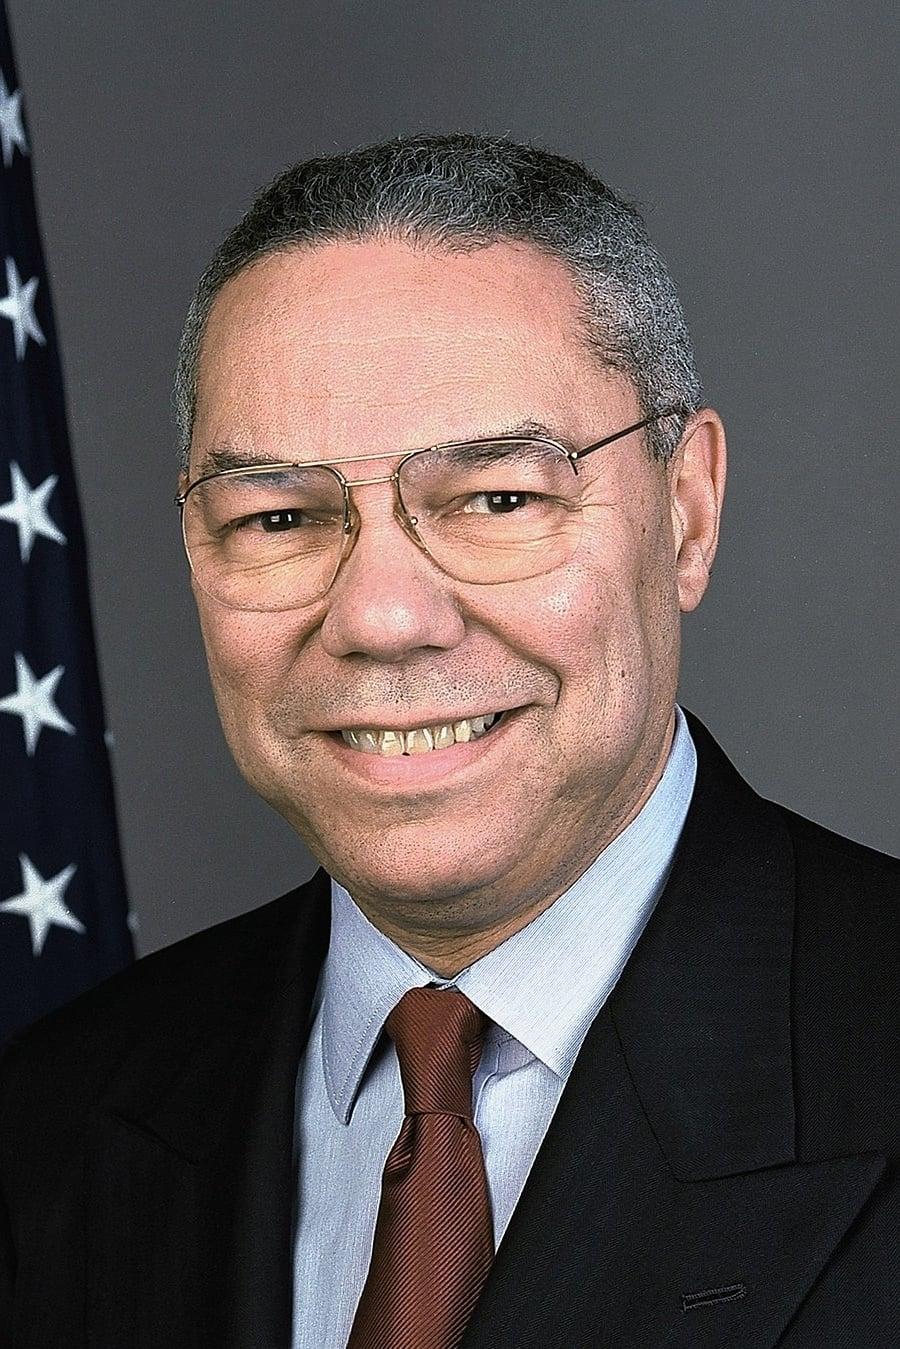 Colin Powell poster